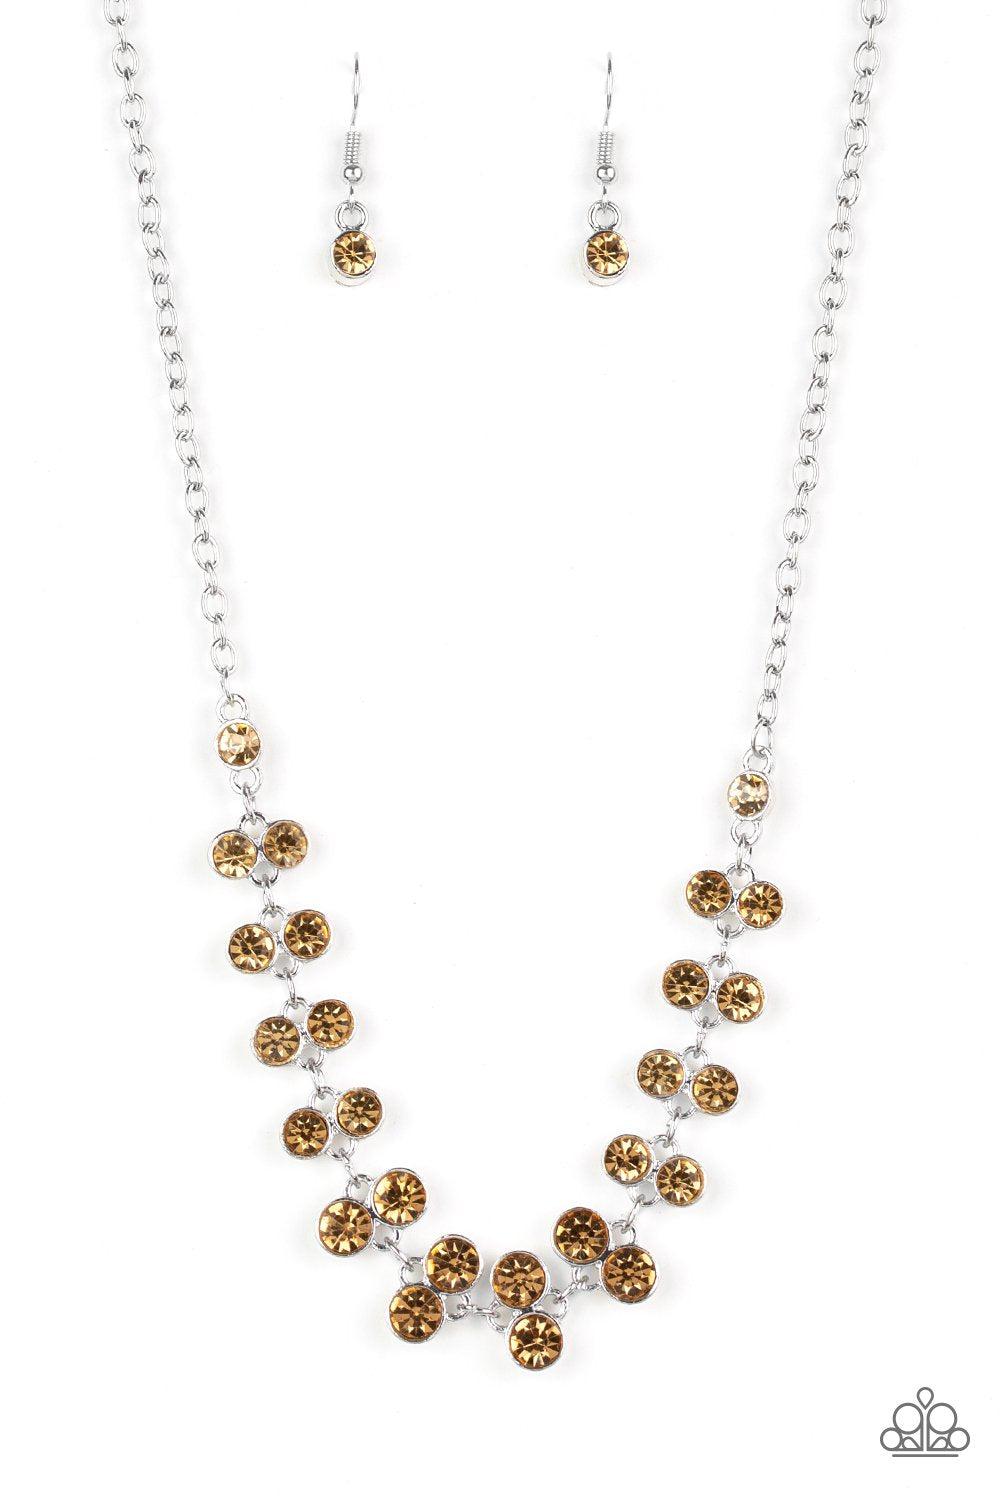 Super Starstruck Brown Topaz Gem Necklace and matching Earrings - Paparazzi Accessories-CarasShop.com - $5 Jewelry by Cara Jewels